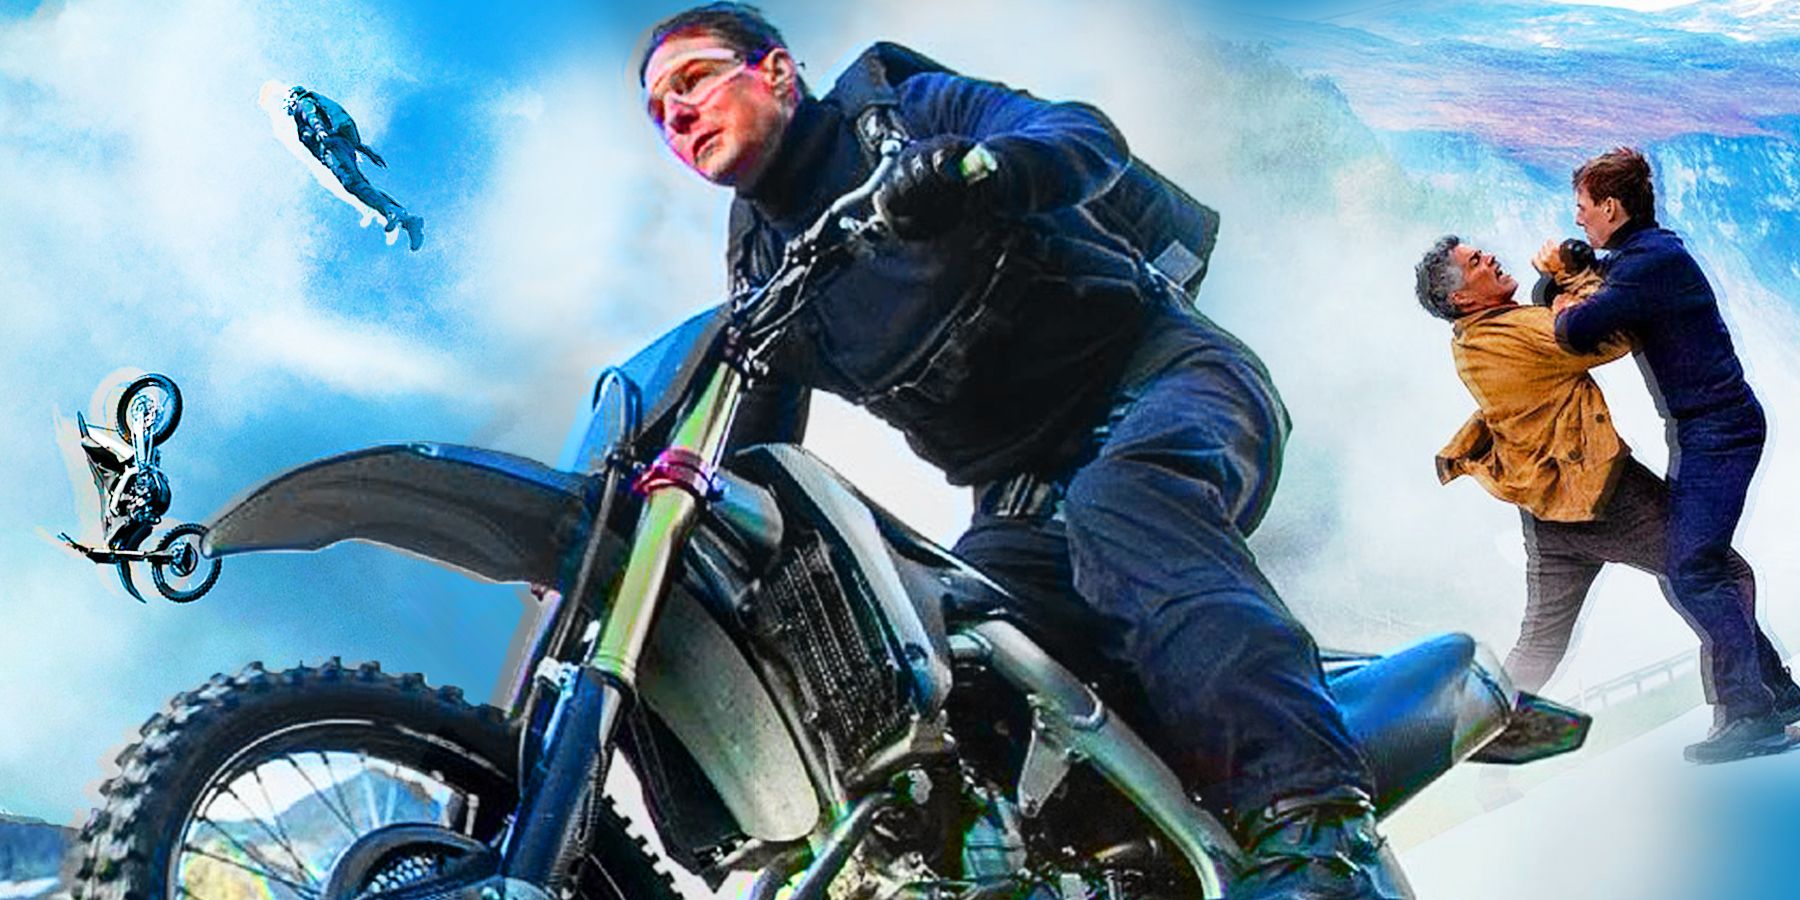 Tom Cruise Flies through the air on a motorcycle in Mission Impossible Dead Reckoning